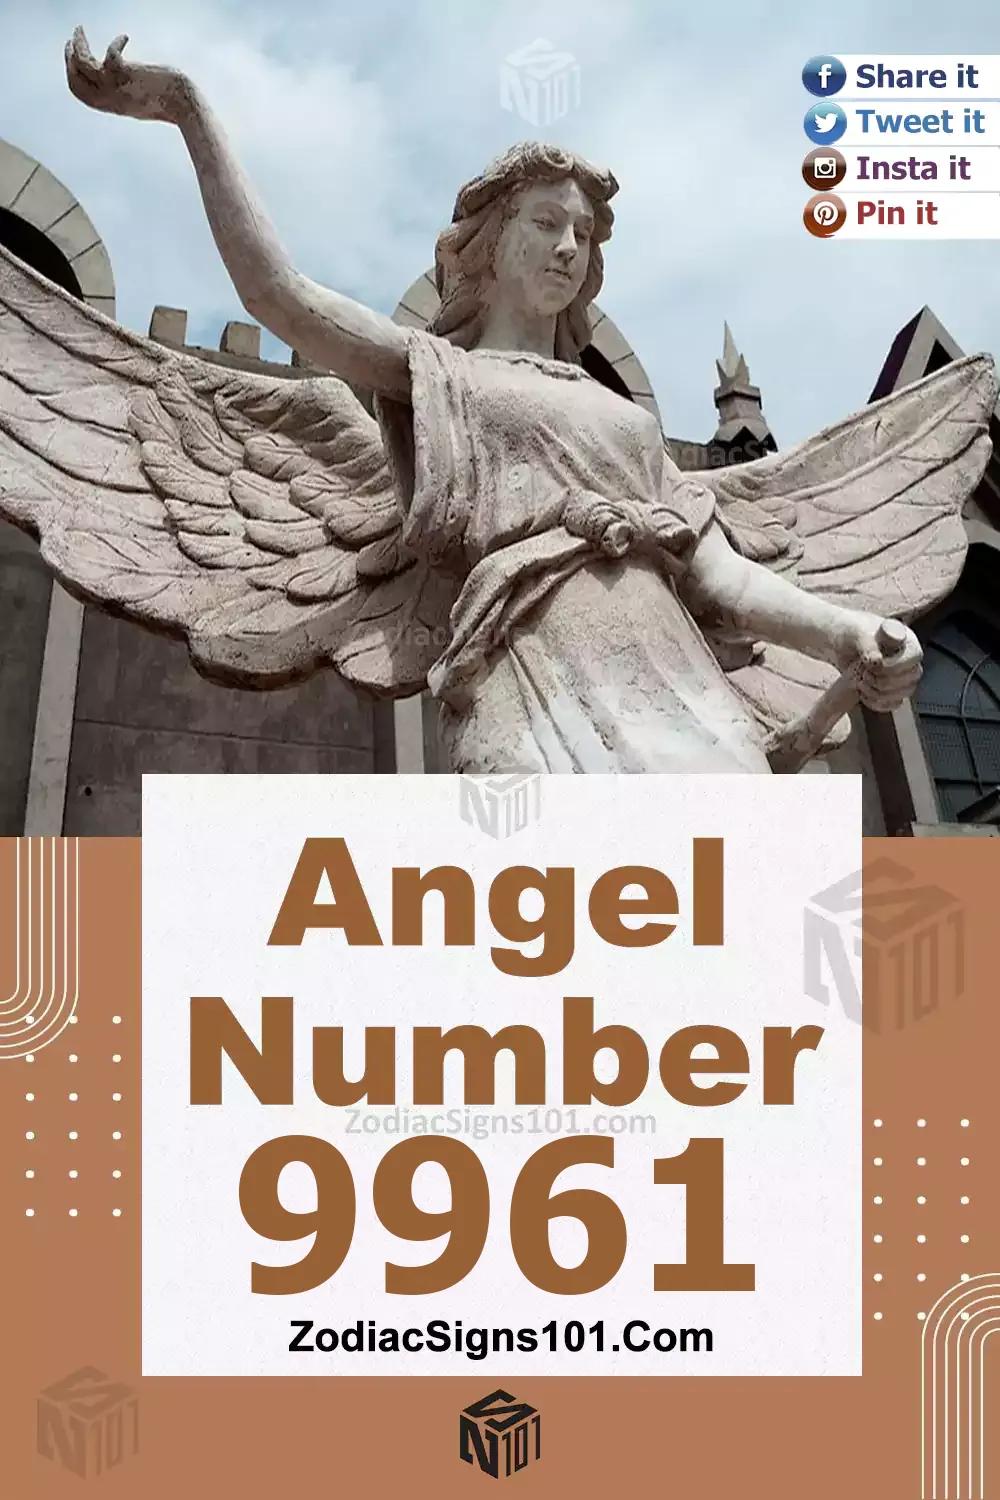 9961 Angel Number Meaning